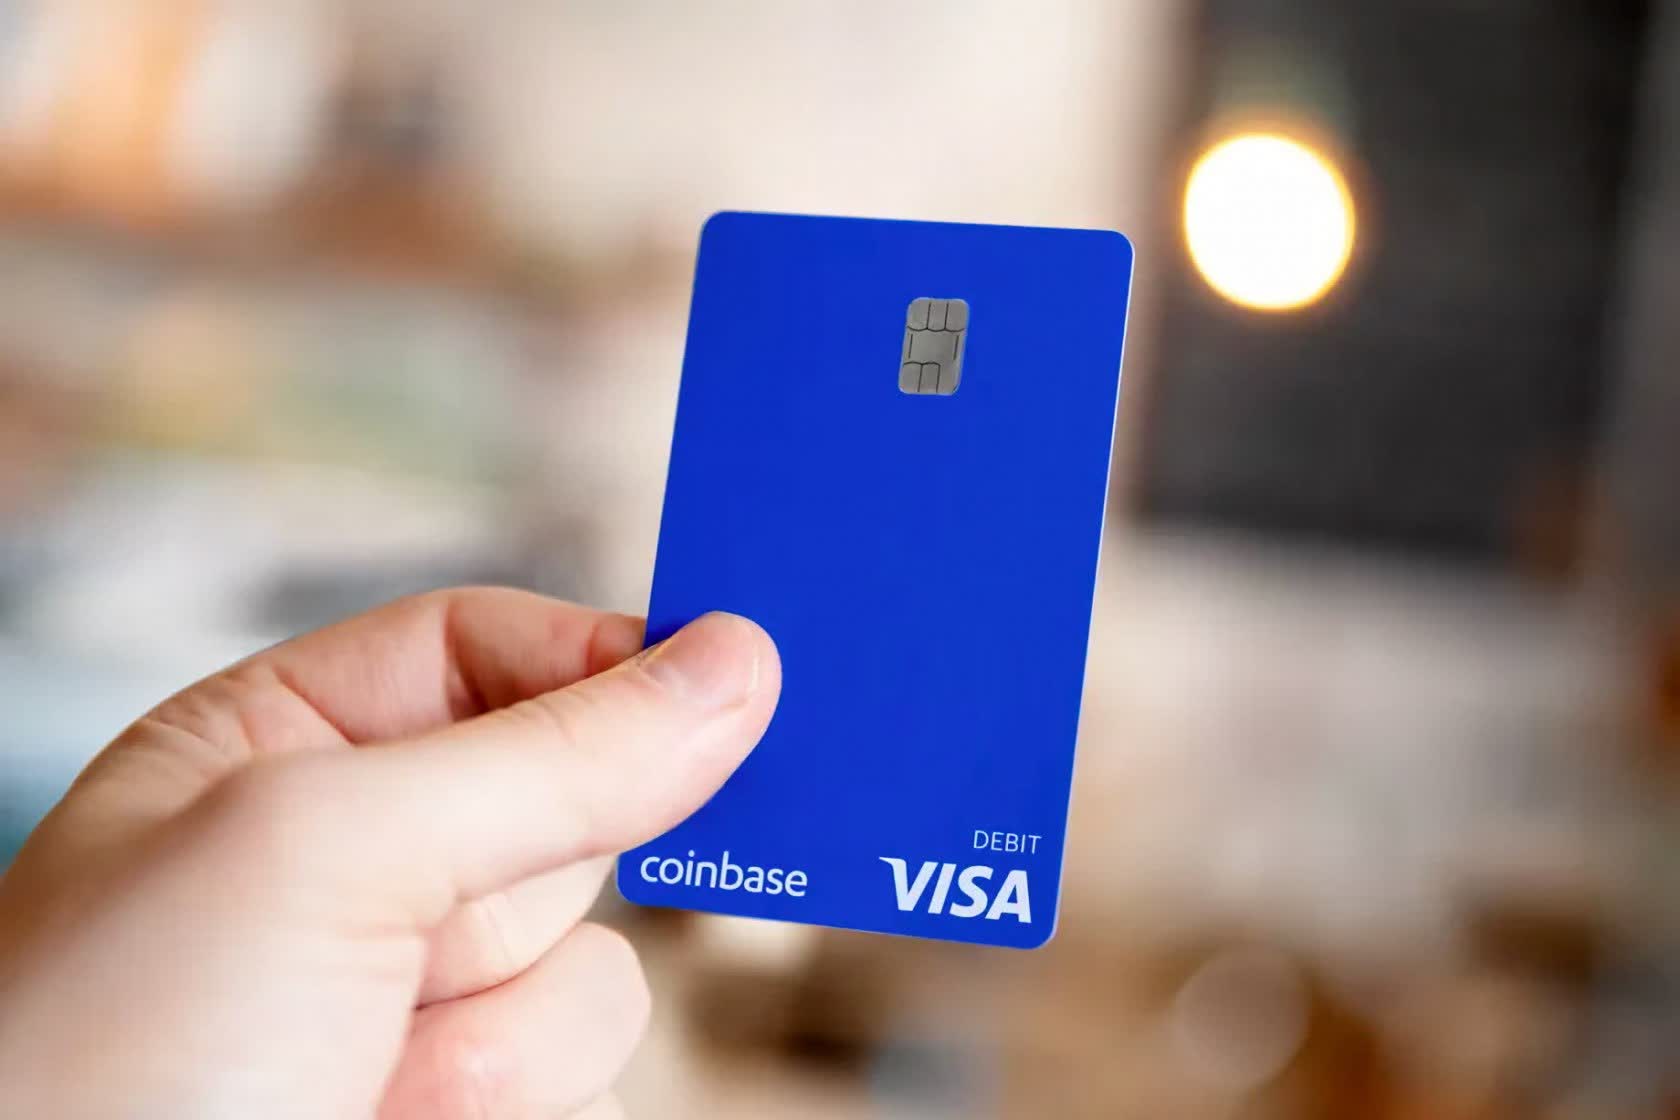 Visa is partnering with 50 leading crypto companies to let users spend digital assets at merchants worldwide